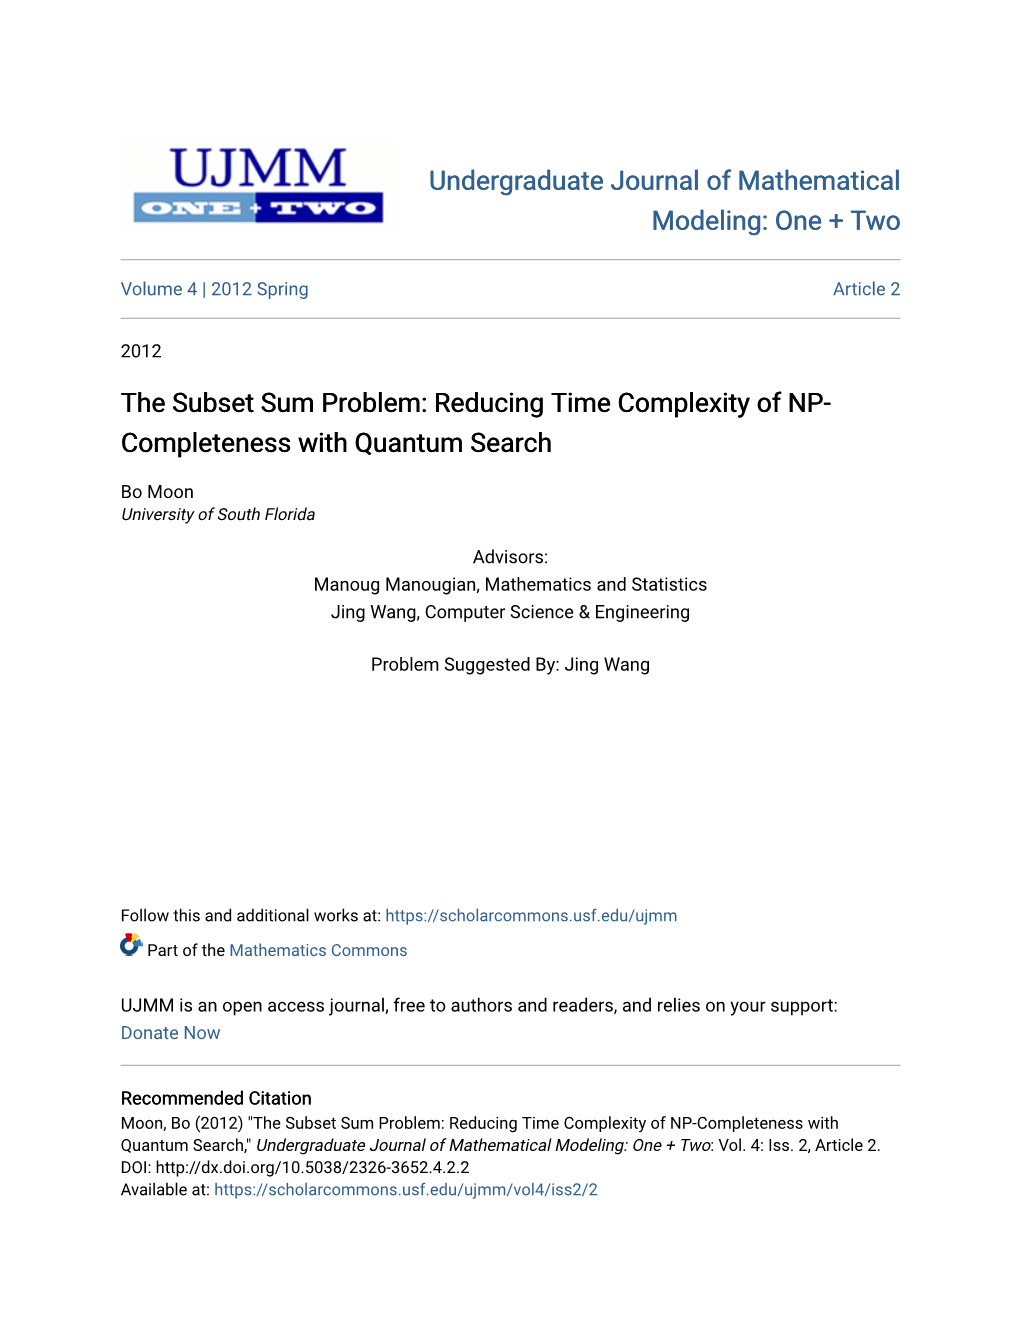 The Subset Sum Problem: Reducing Time Complexity of NP- Completeness with Quantum Search